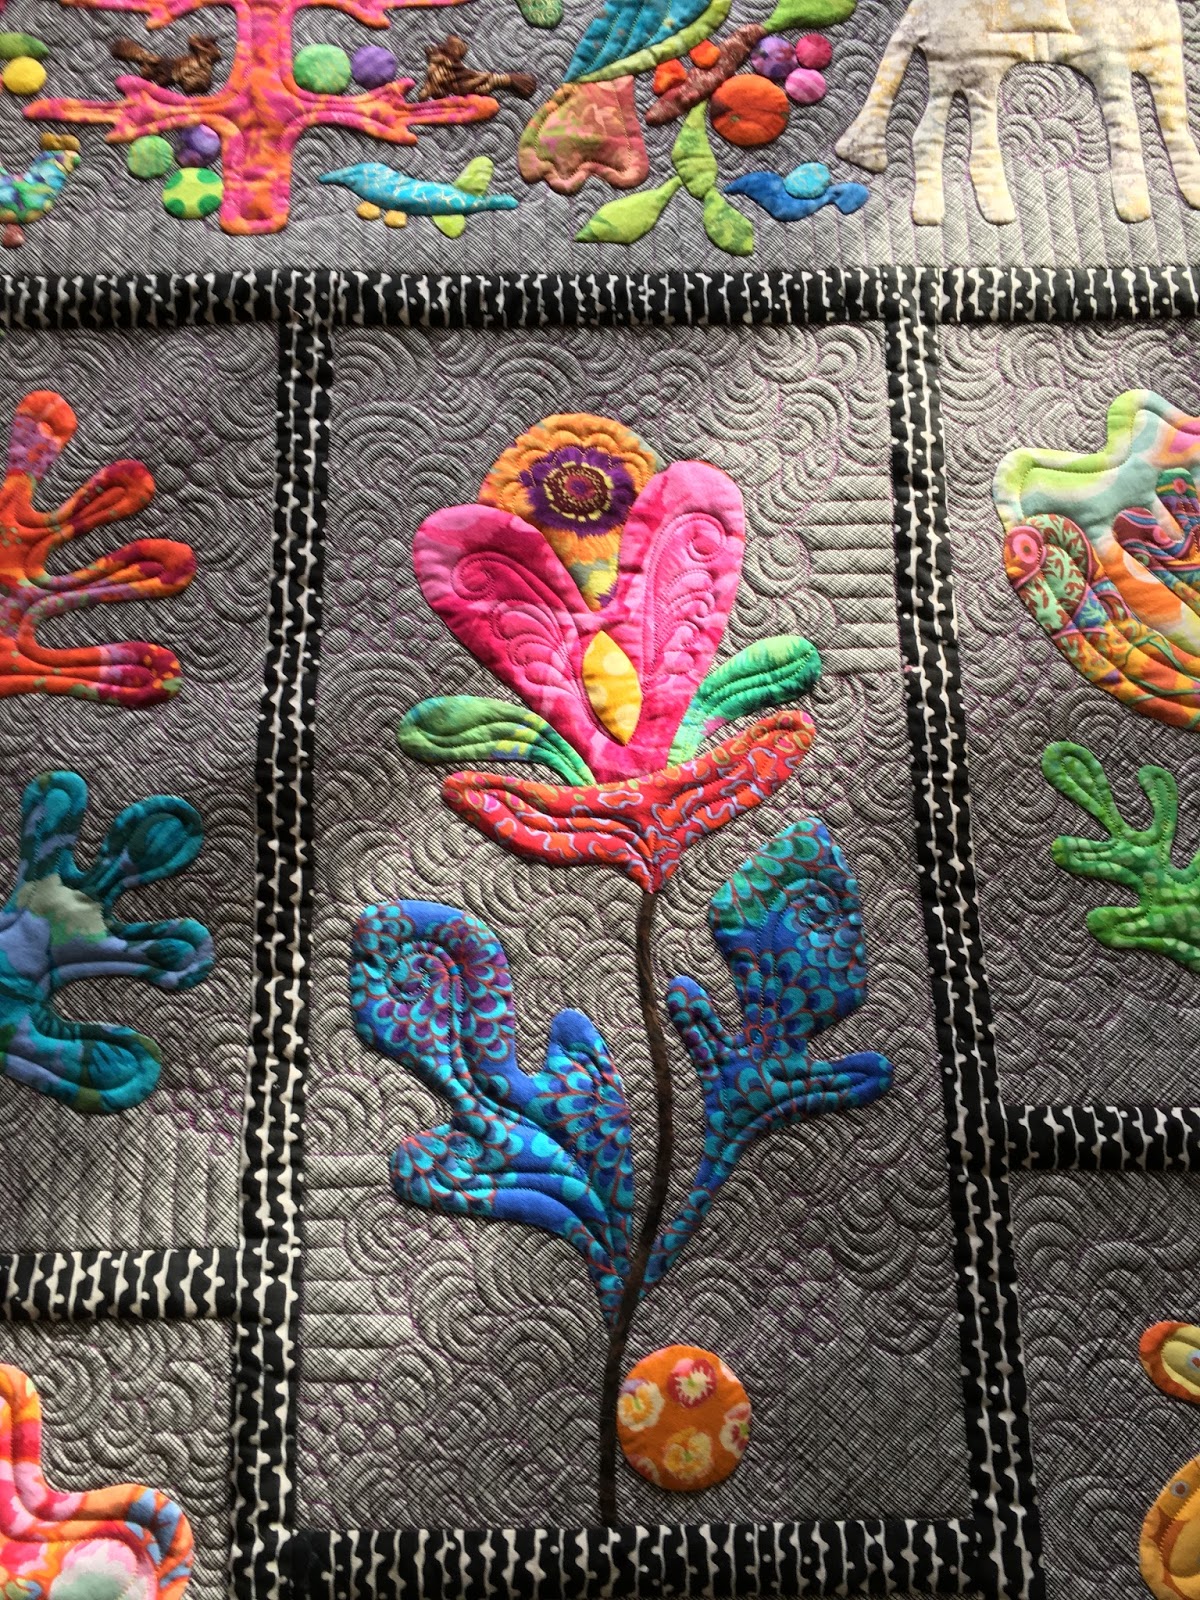 Sewing & Quilt Gallery Beautiful Applique